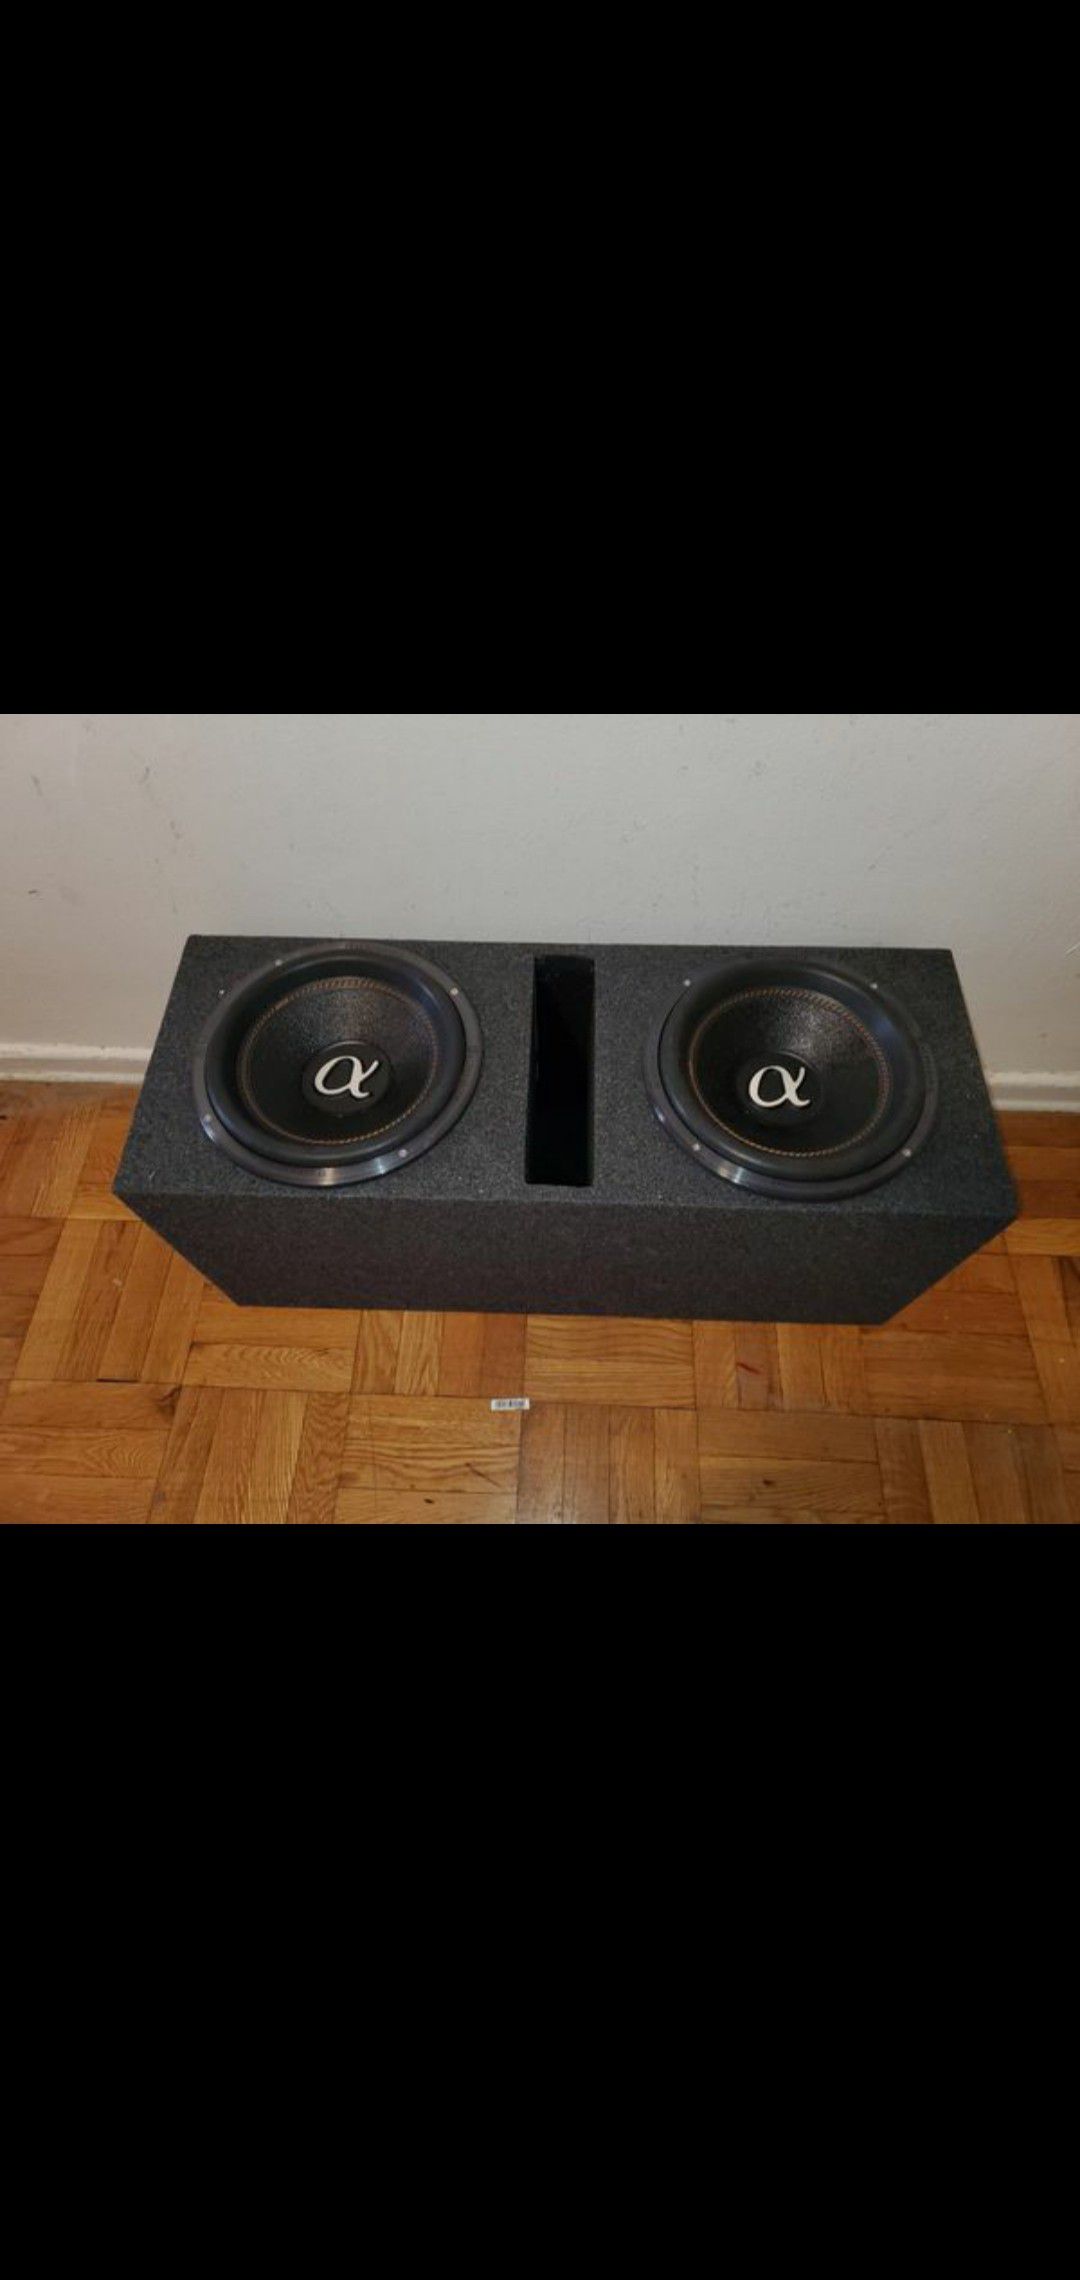 12" ALPHASONIK VENUM SUBWOOFERS 1200W RMS 3600WATTS MAX EACH SUBWOOFER GIVING YOU 7200WATTS MAX